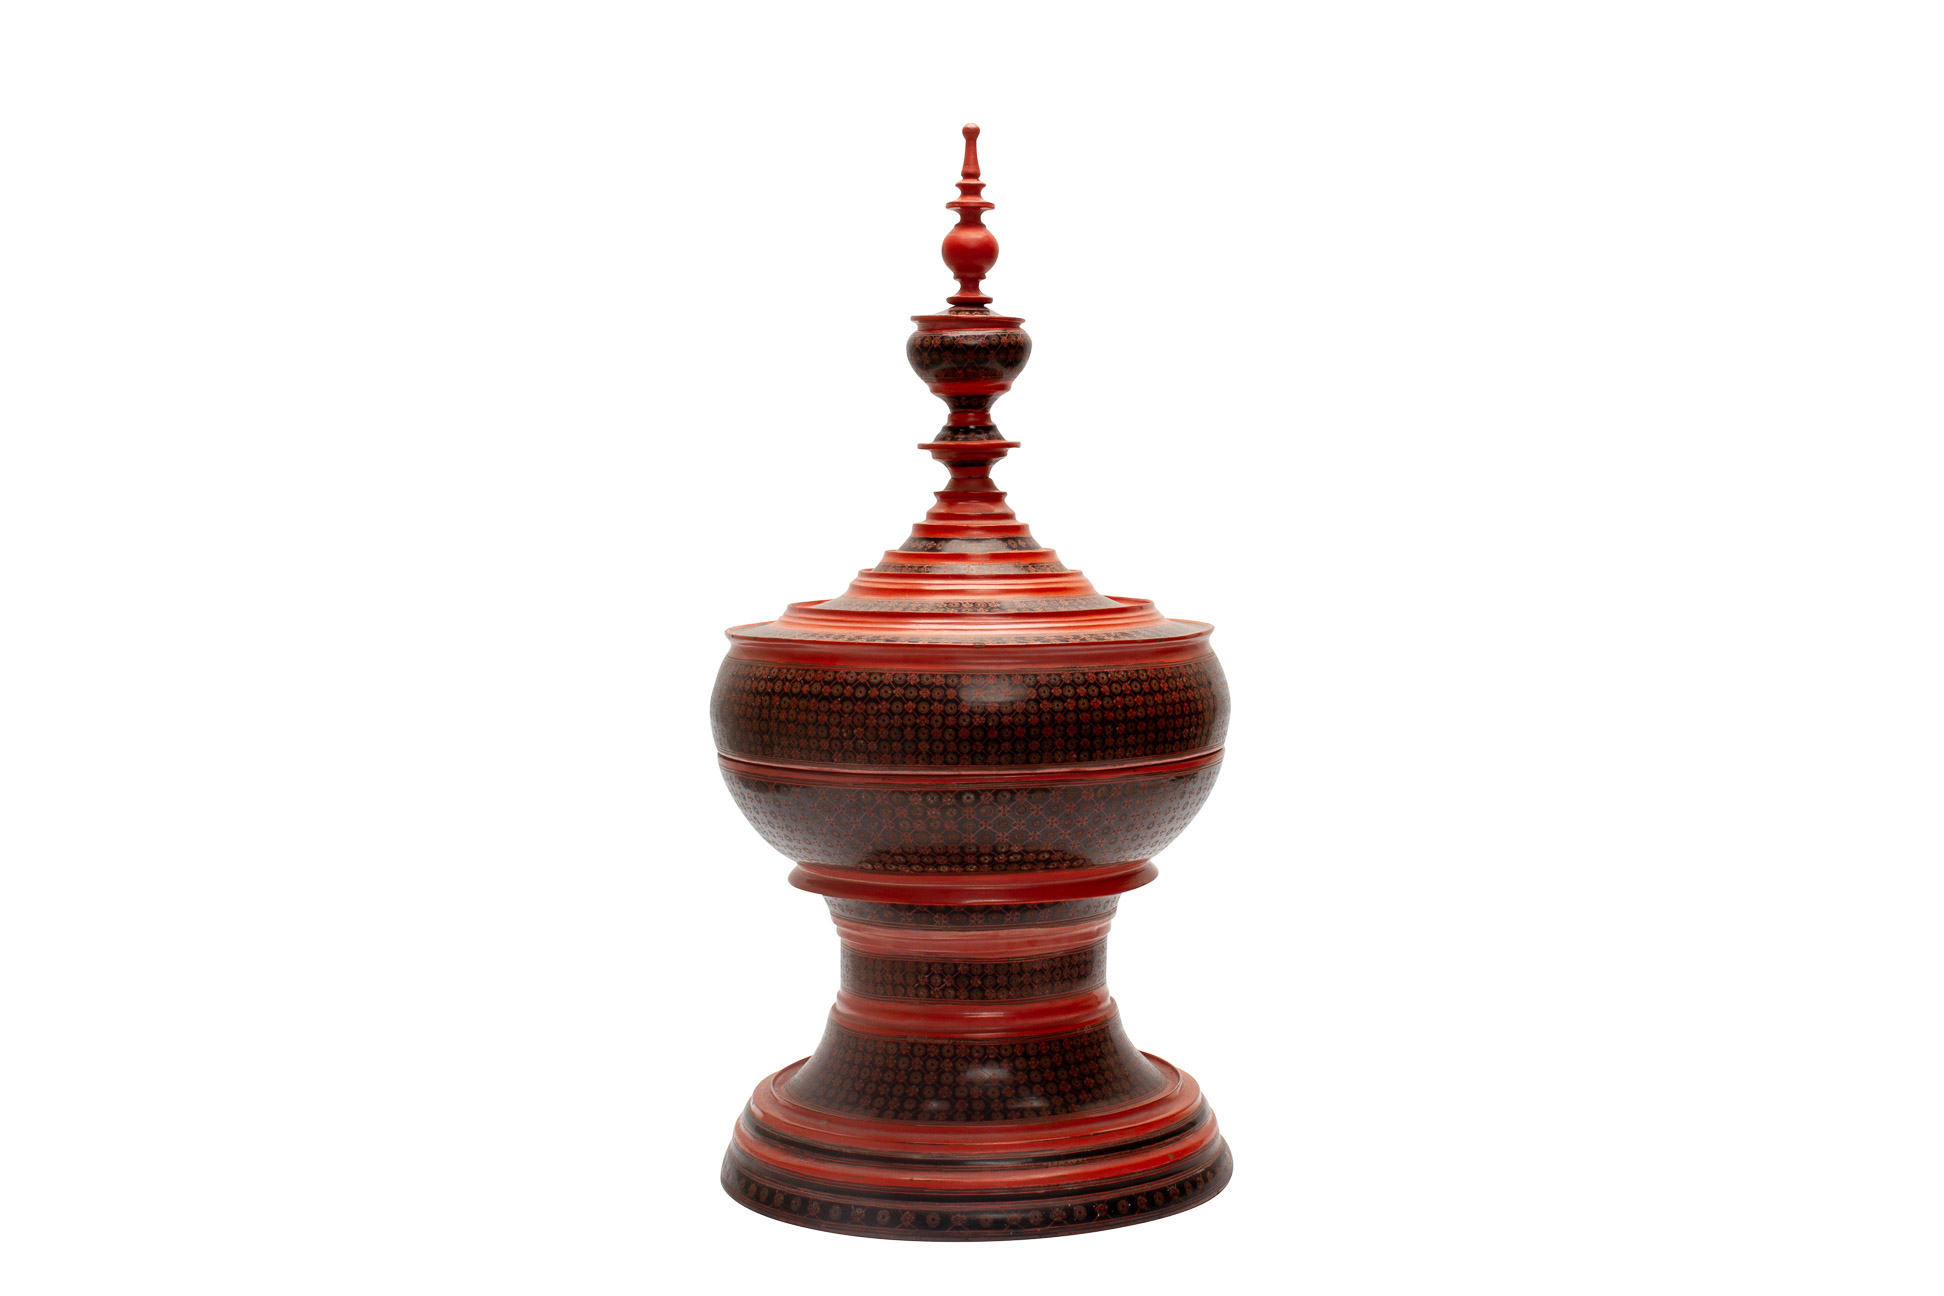 A LARGE BURMESE LACQUER HSUN OK OFFERING VESSEL